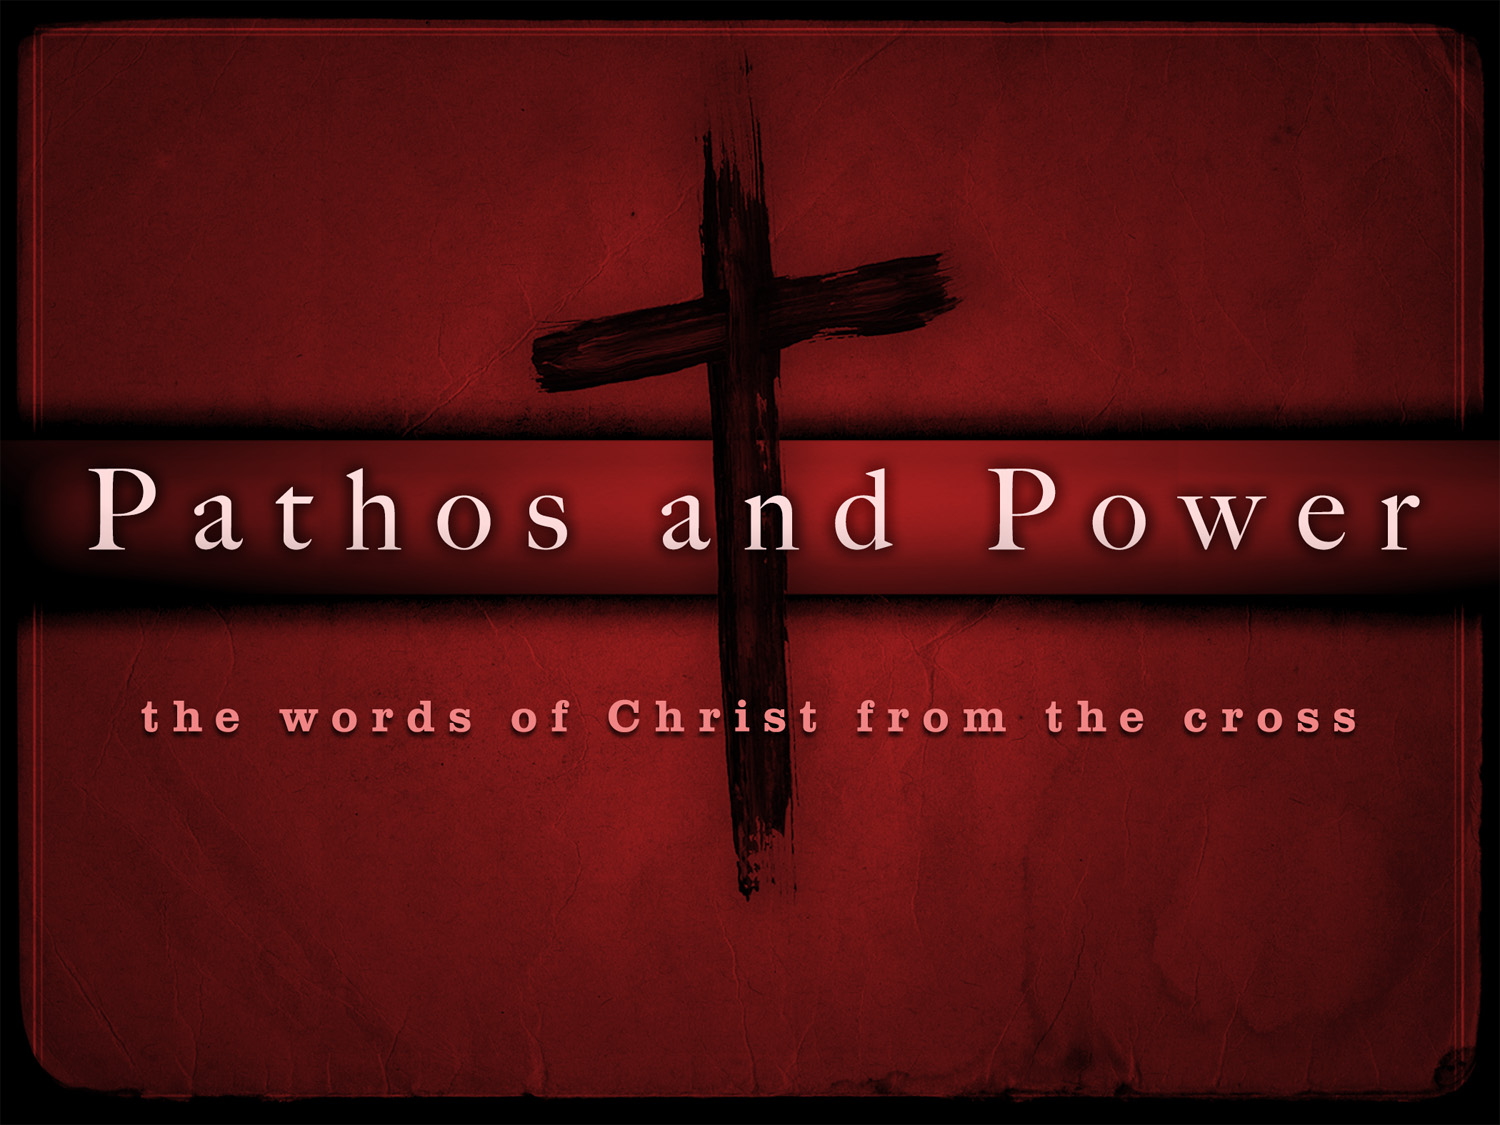 Pathos and Power: Humanity